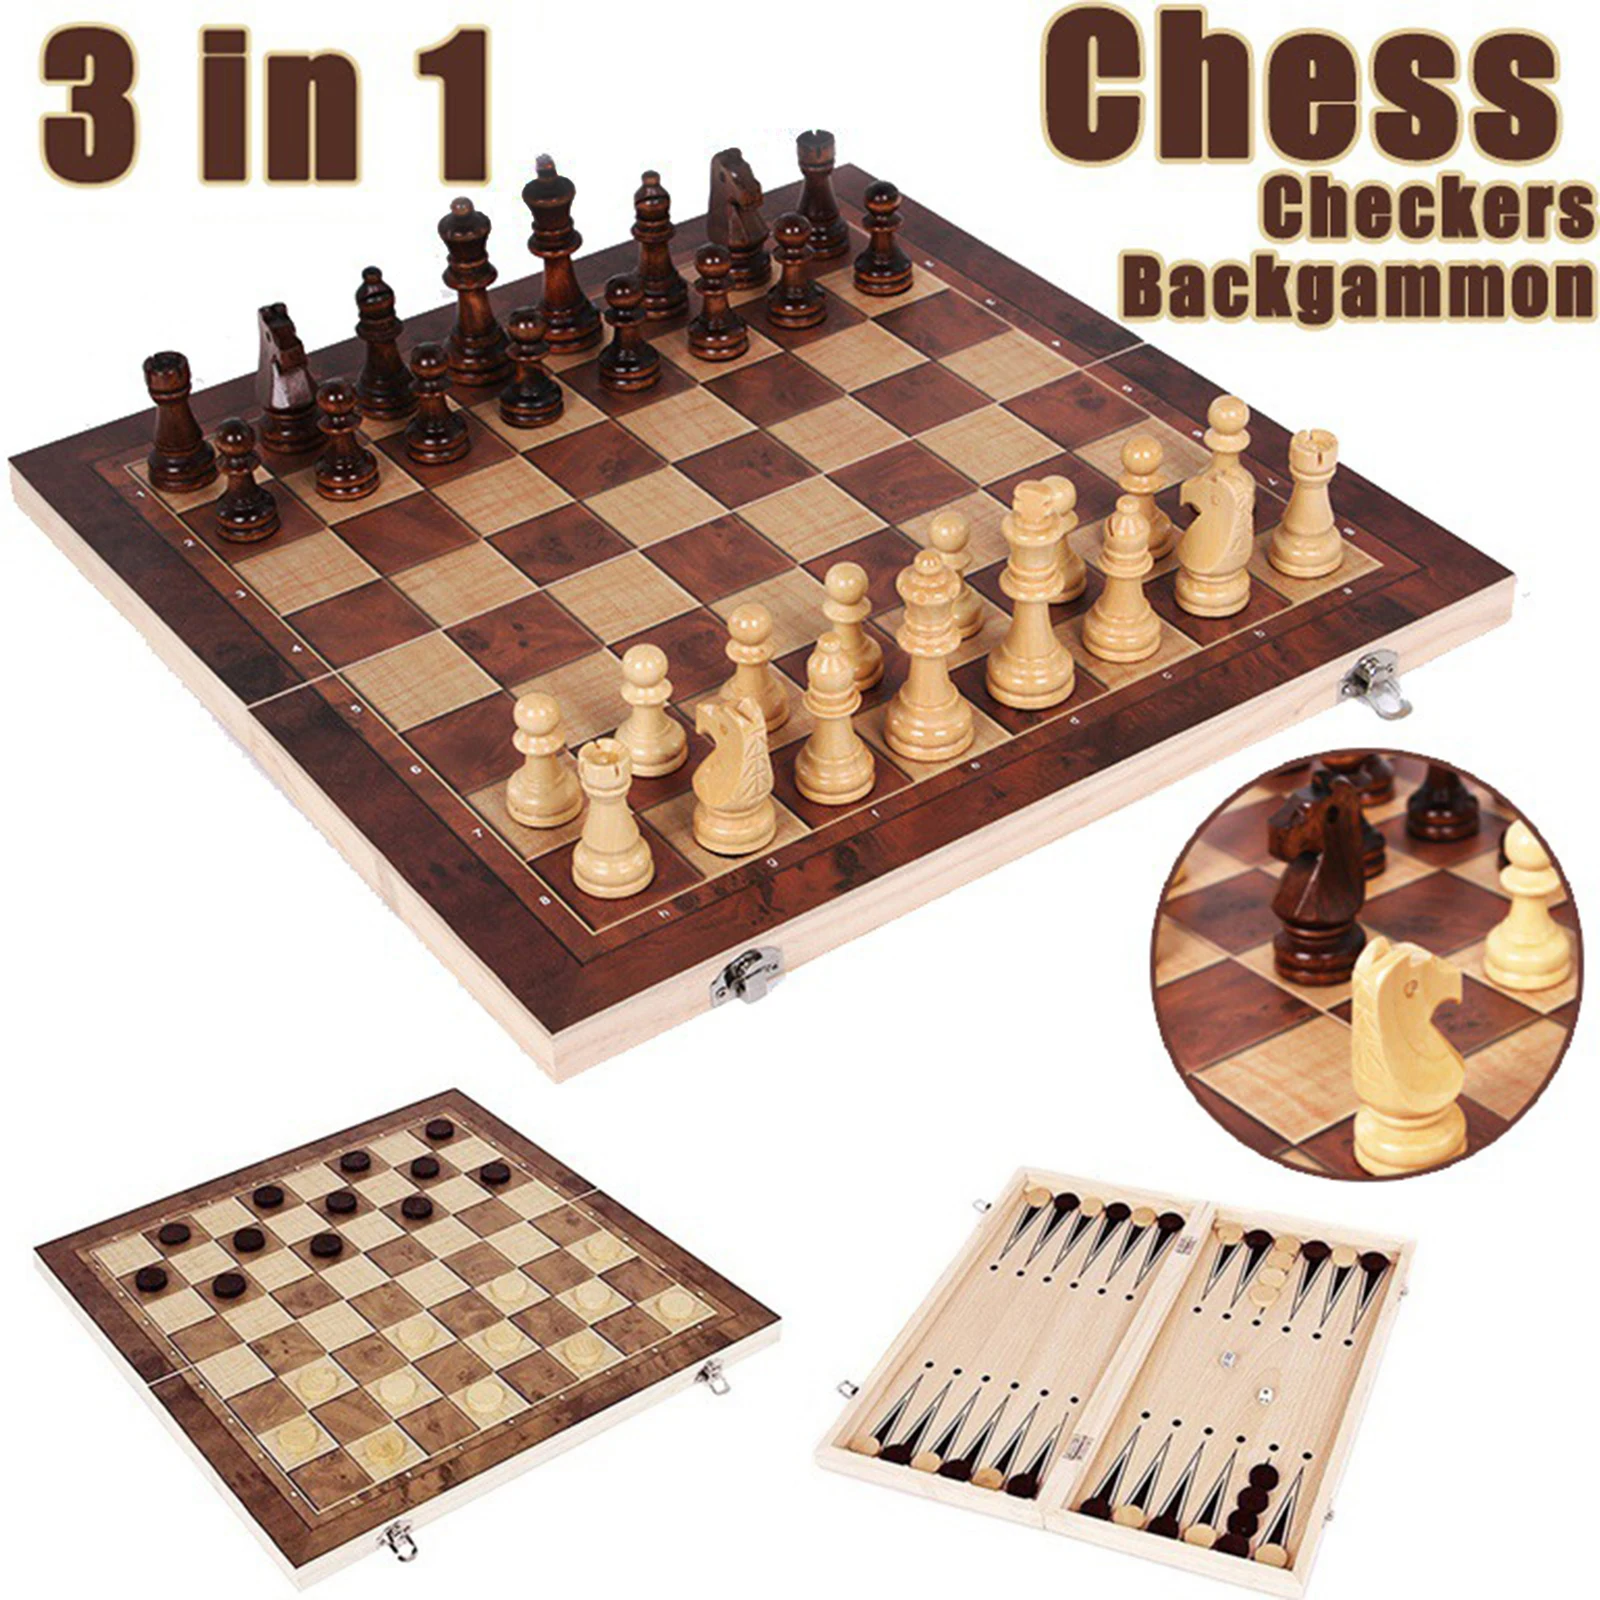 WOODEN 3 IN 1 VINTAGE CHESS GAME SET CHESS SET BOX CHECKERS BACKGAMMON BOARD 